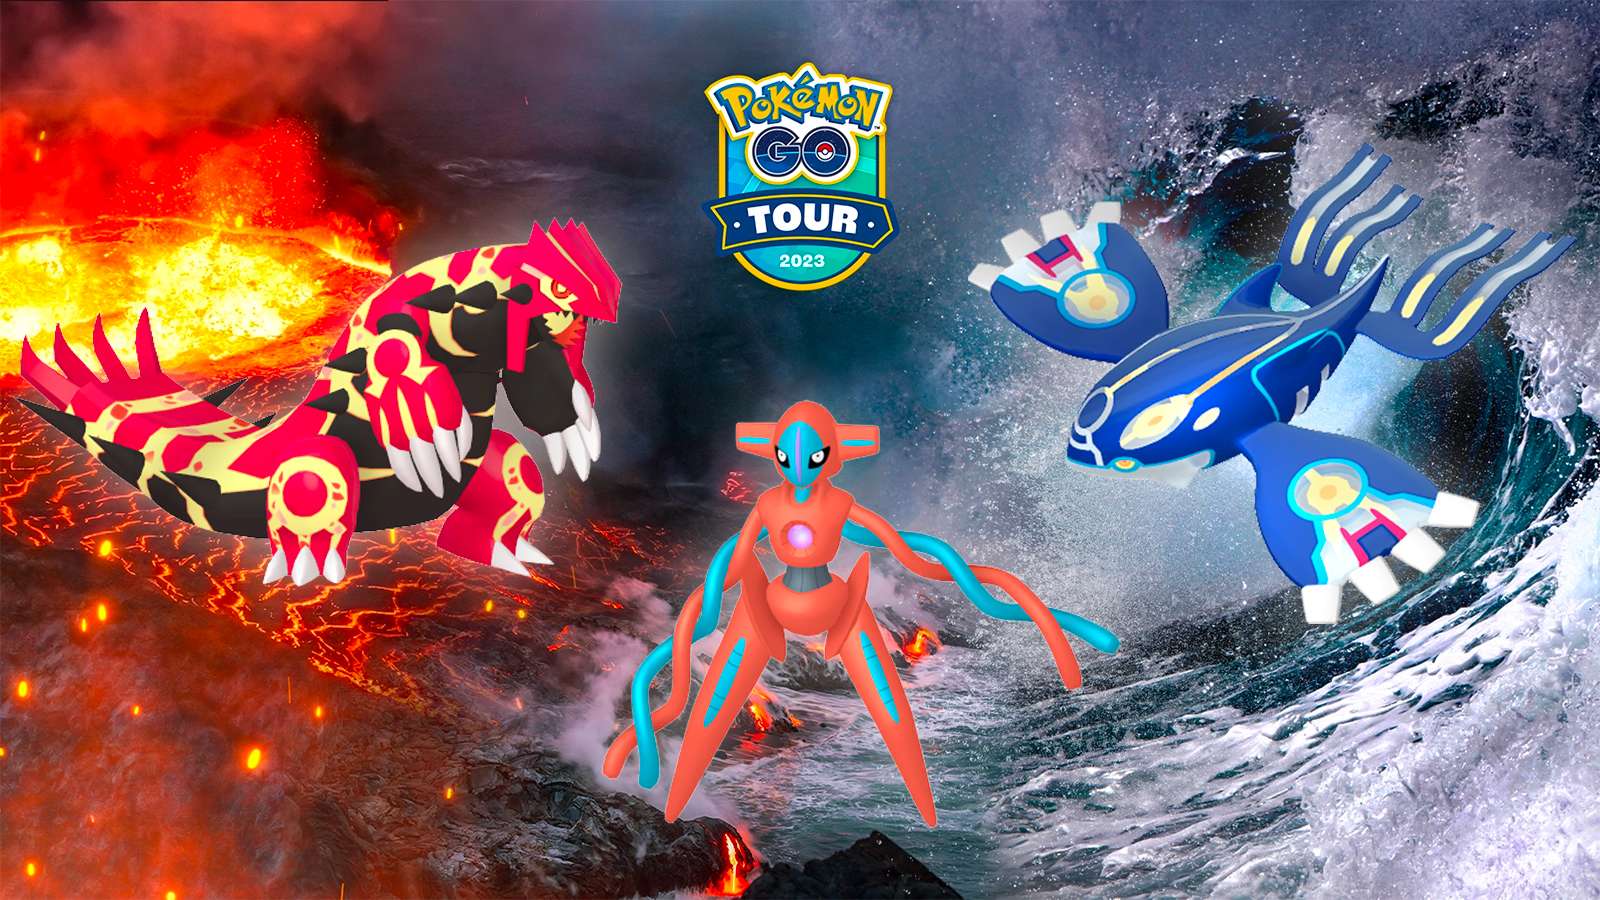 Primal Kyogre and Primal Groudon appearing in the Pokemon Go Tour Hoenn Raid Schedule